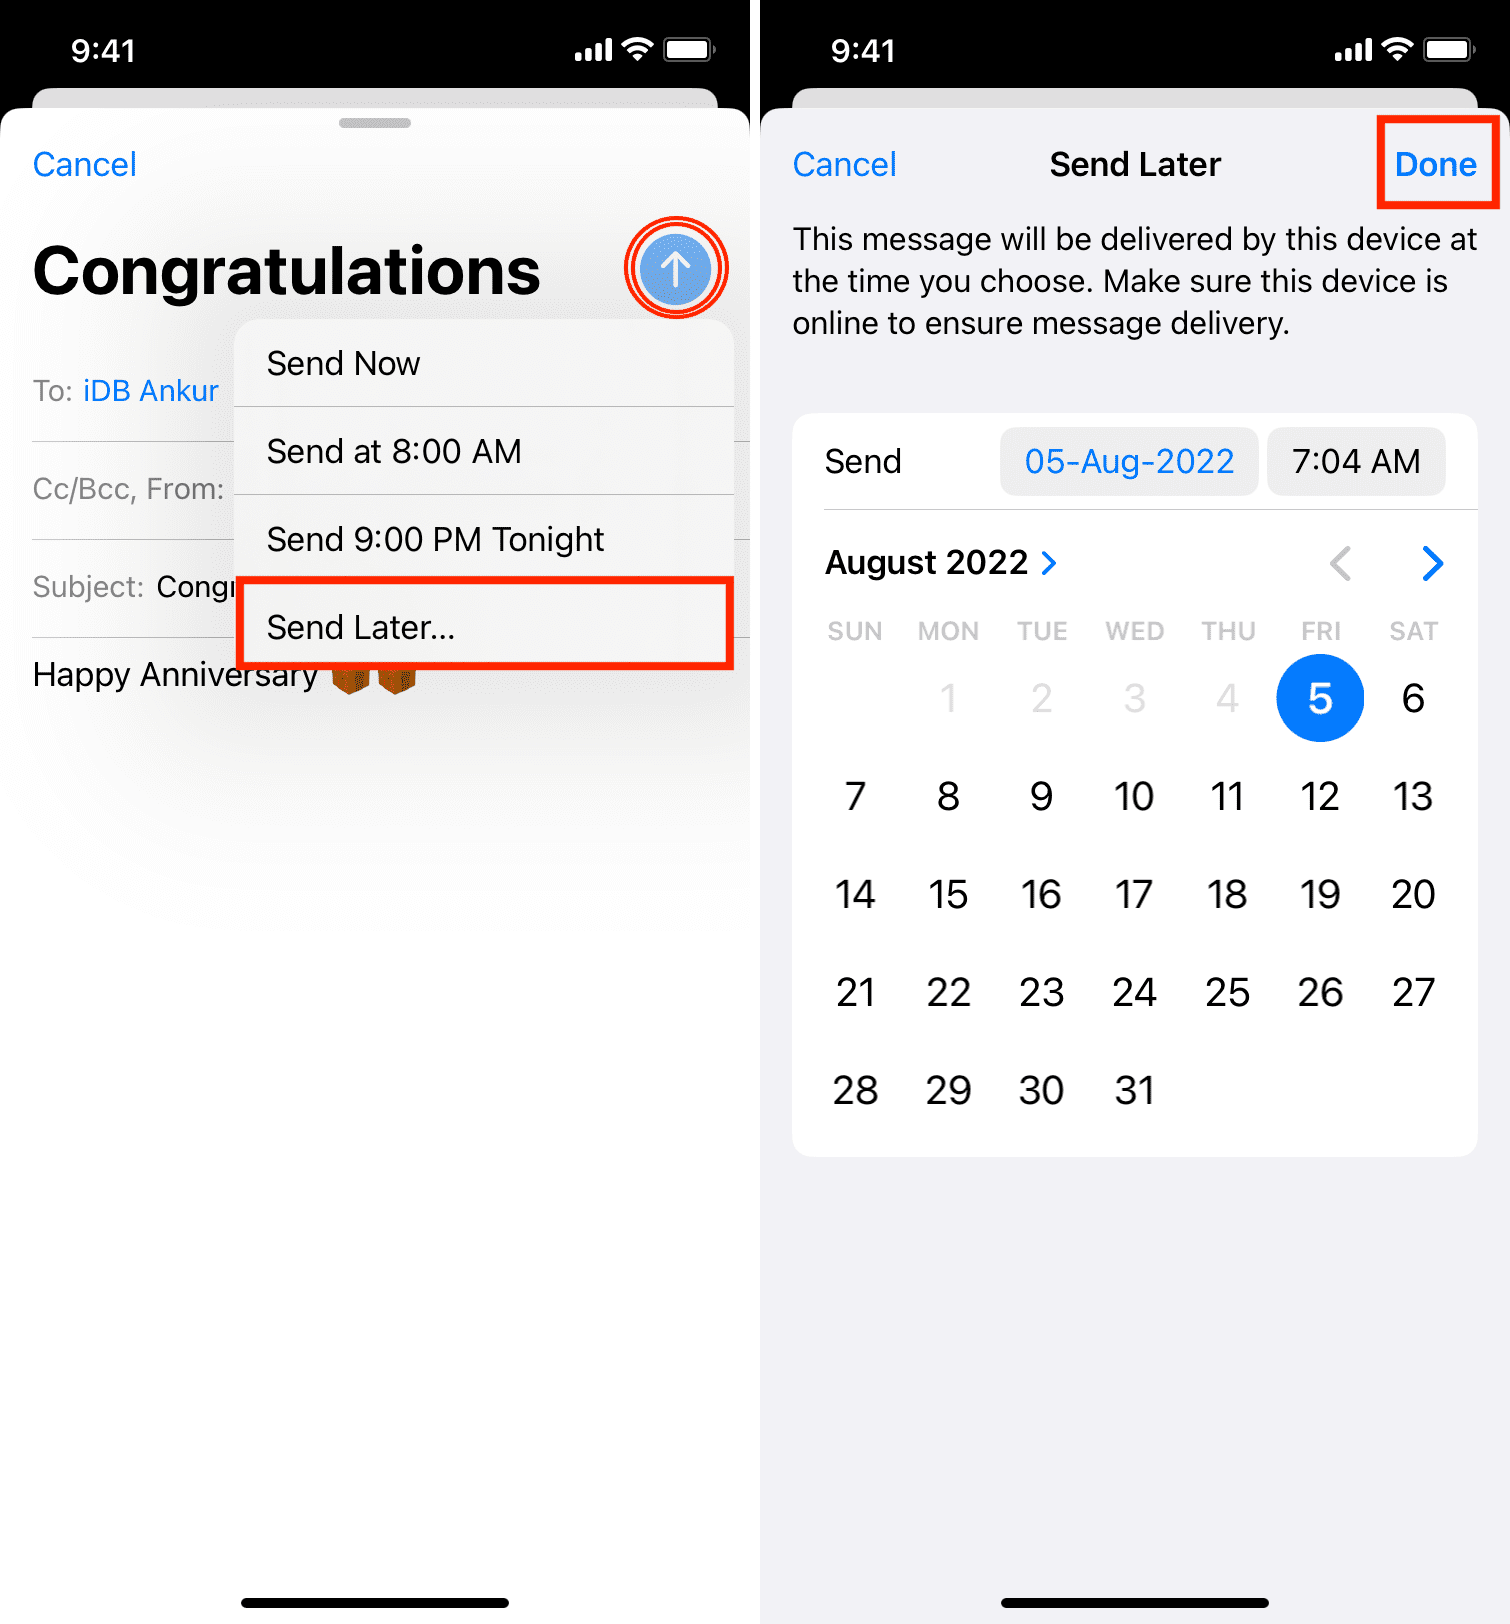 Schedule email in iPhone Mail app